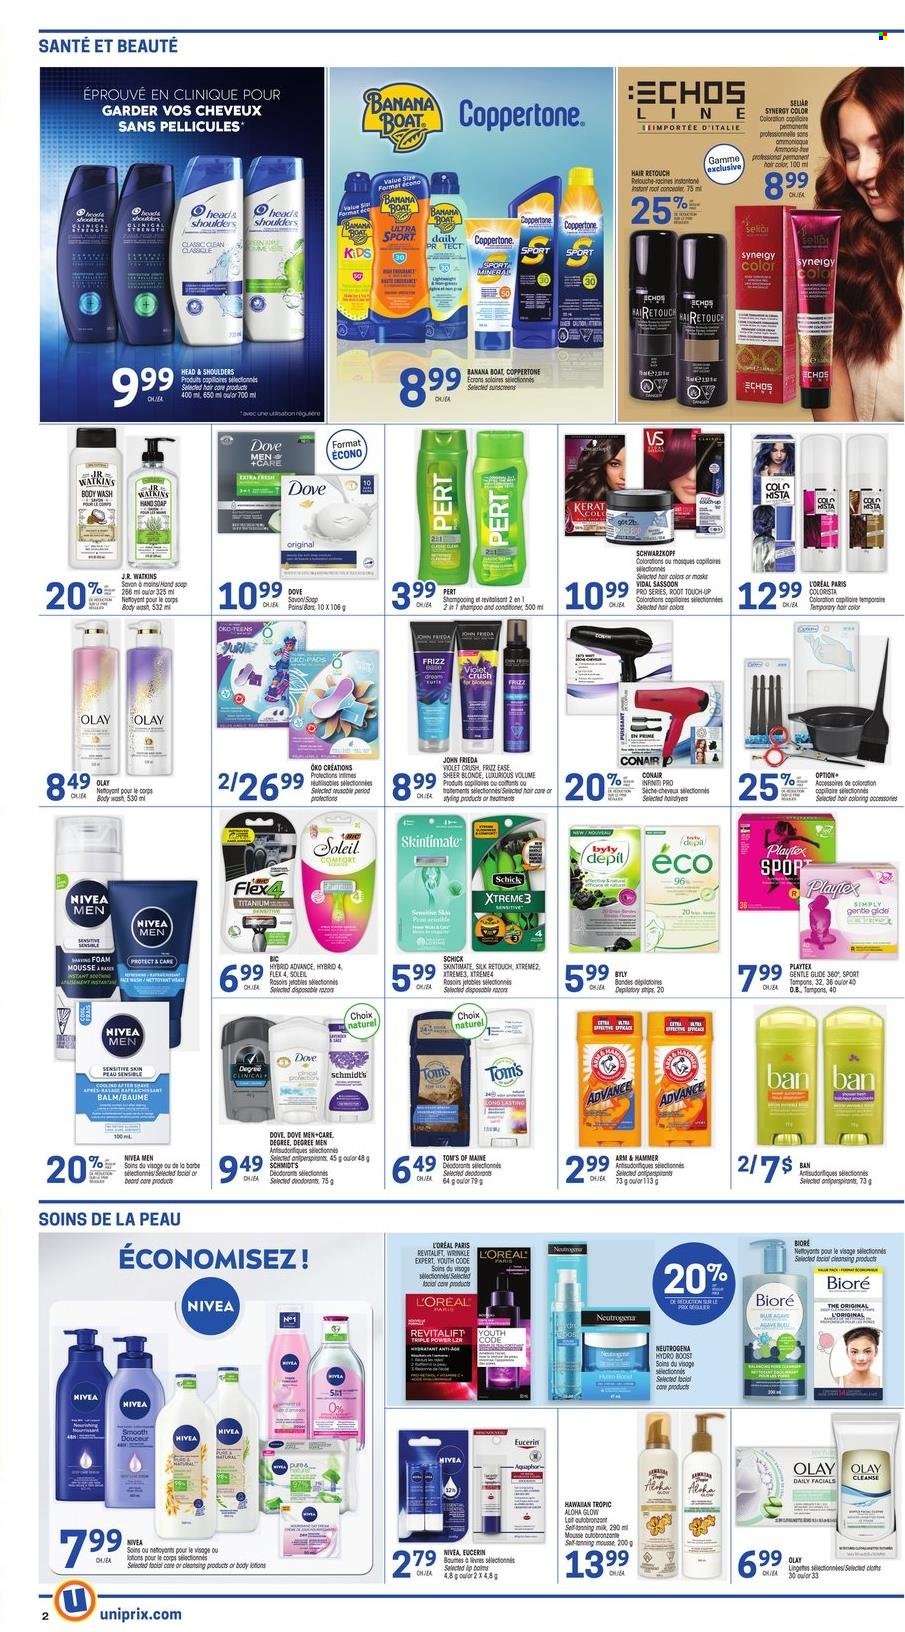 thumbnail - Uniprix Flyer - June 30, 2022 - July 06, 2022 - Sales products - ARM & HAMMER, Boost, Nivea, body wash, hand soap, soap, Playtex, tampons, Clinique, L’Oréal, Olay, Bioré®, Root Touch-Up, conditioner, hair color, John Frieda, BIC, Schick, corrector, Dove, Eucerin, Neutrogena, shampoo, Head & Shoulders, deodorant. Page 3.